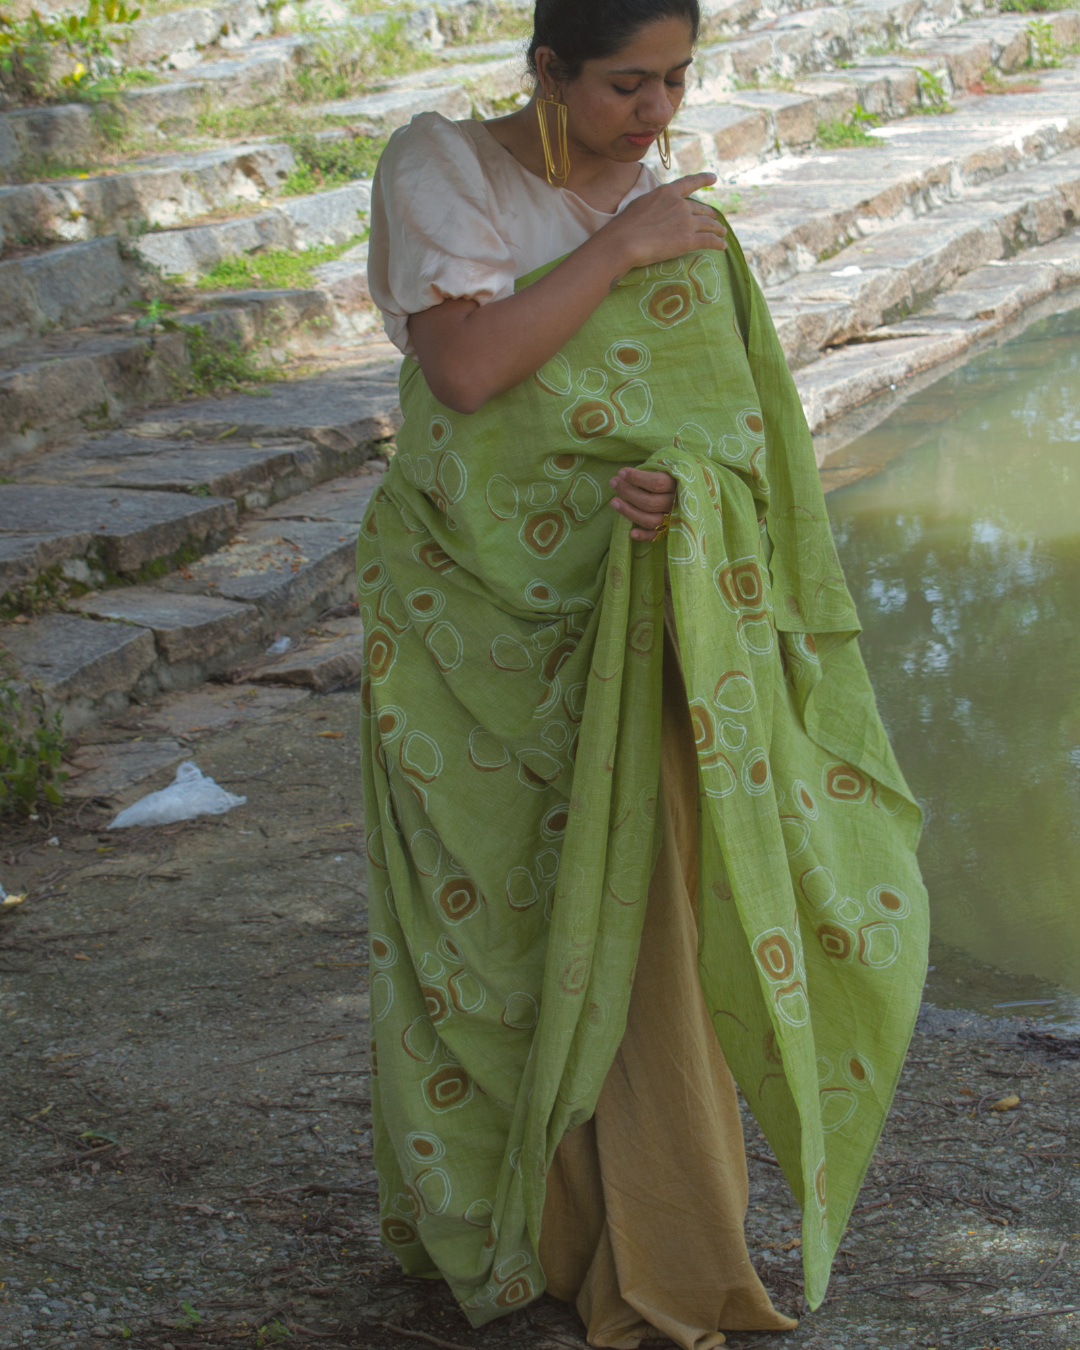 Woman in green and brown saree in front of water body and gold earrings